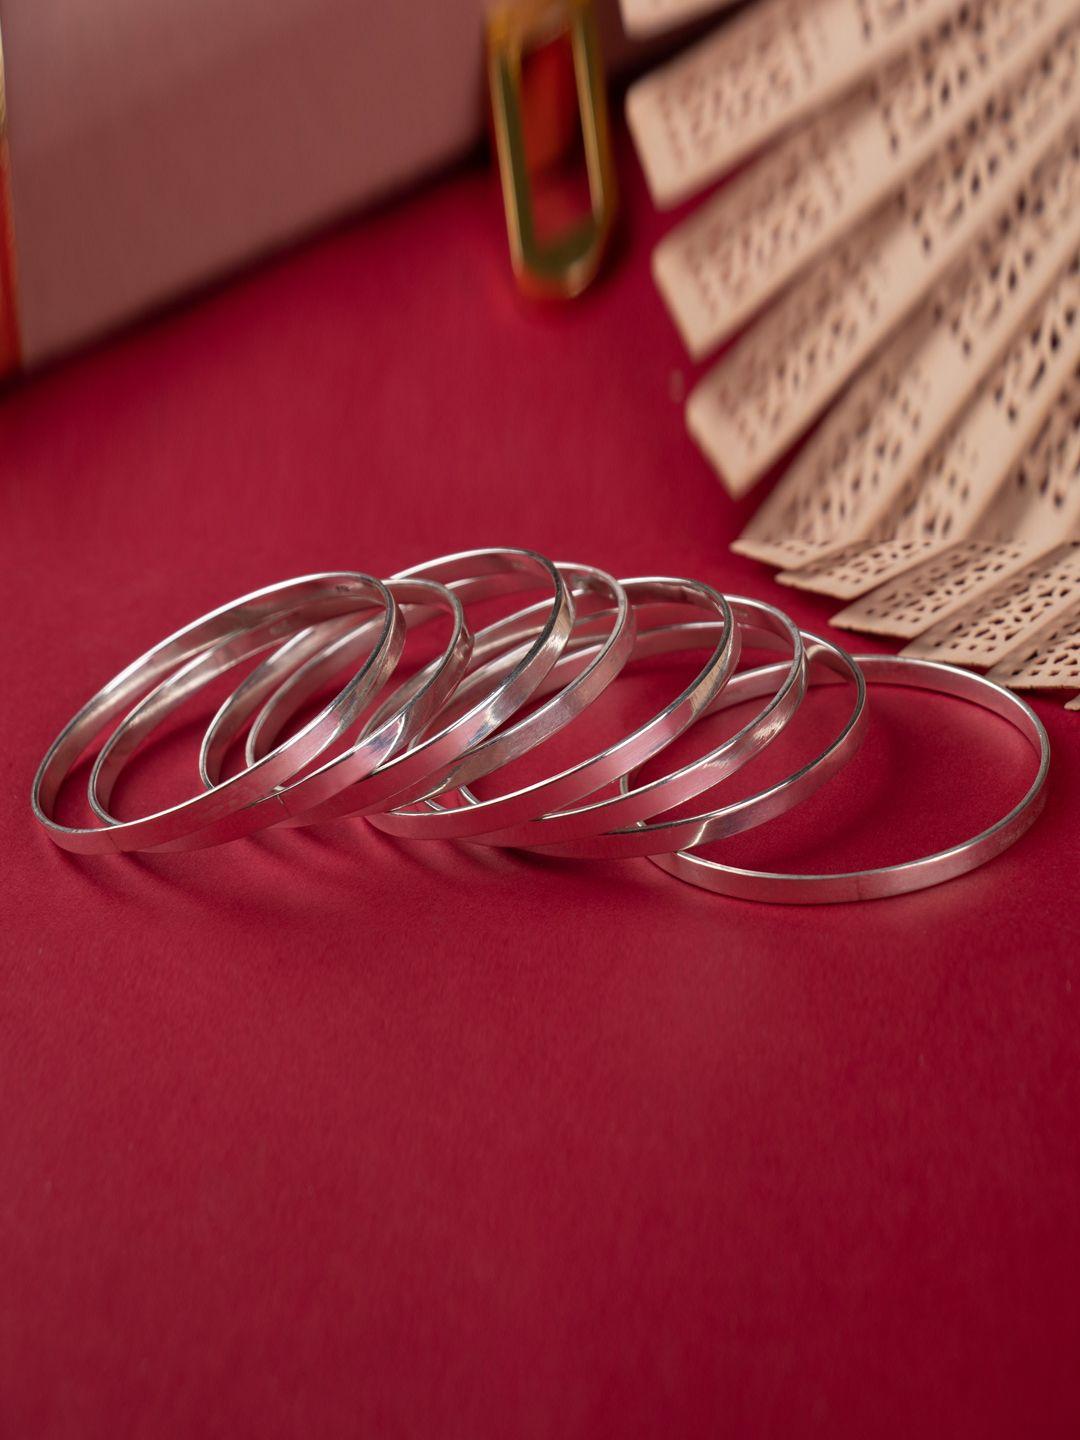 shyle sterling silver bangles